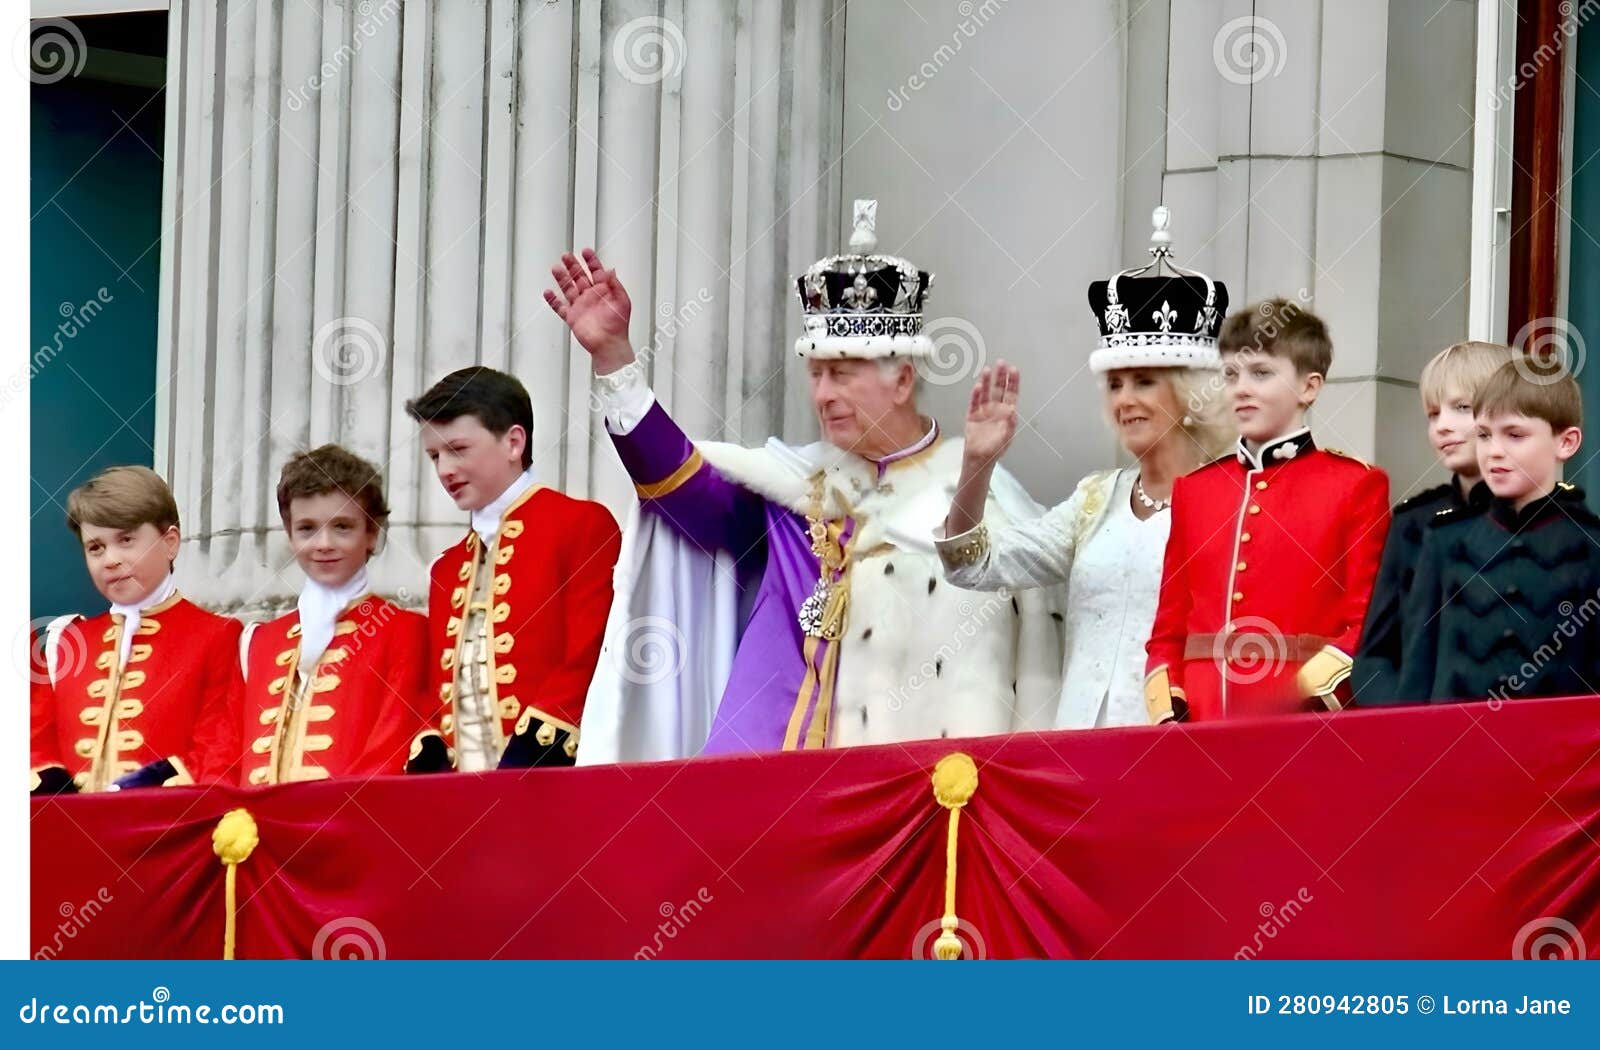 King Charles Iii And Queen Consort Camilla Are Seen On The Balcony Of